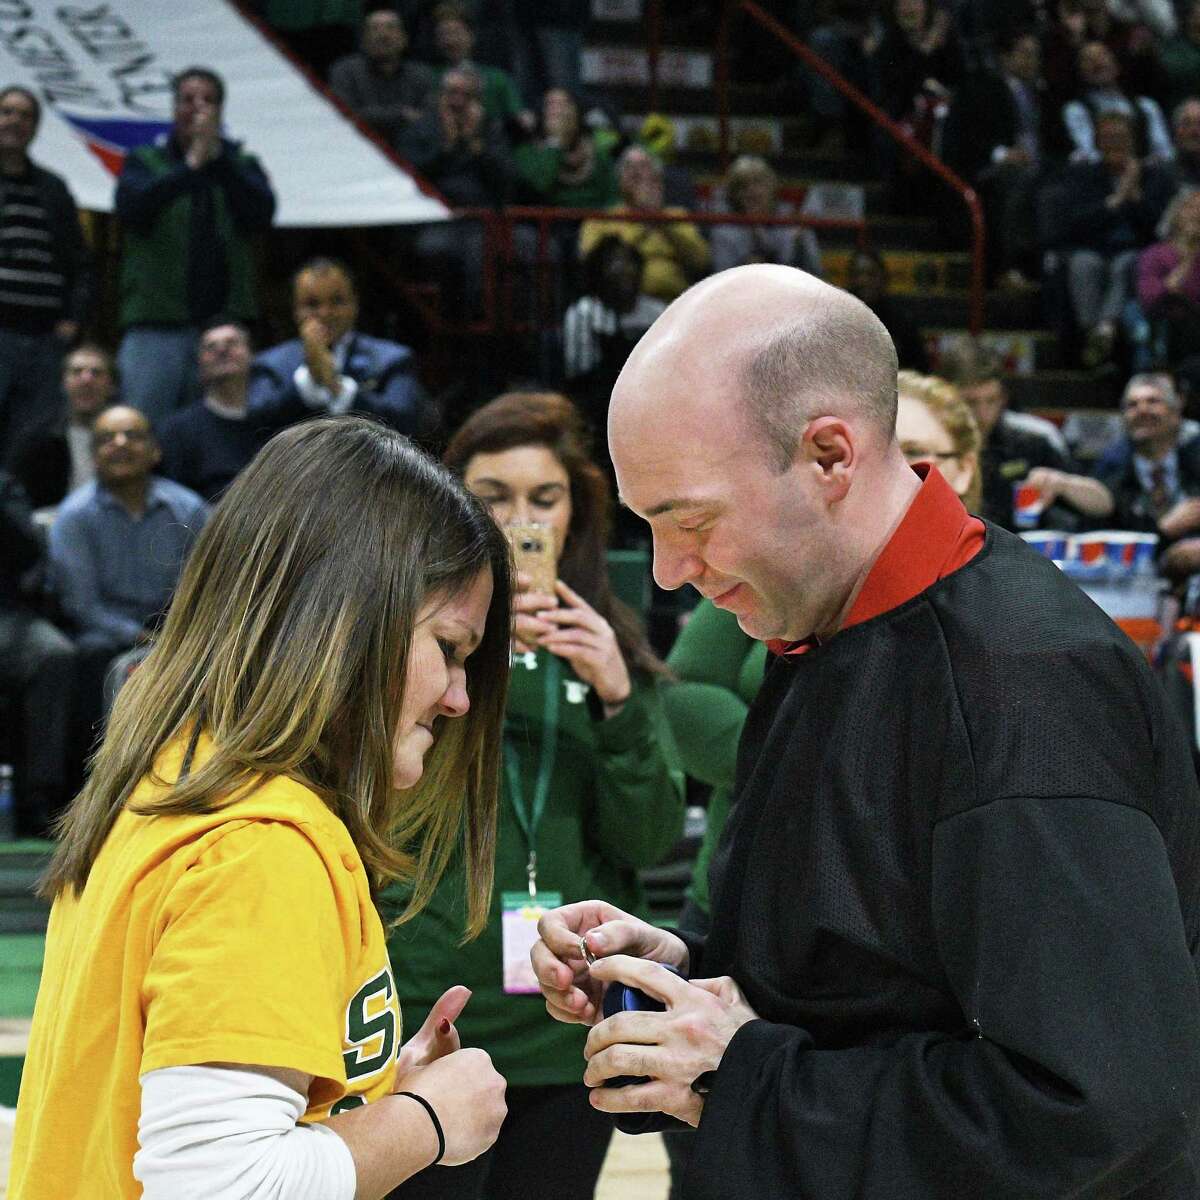 Erin Tobin, left, of Rensselaer is offered an engagement ring by Steve Duckett of Queensbury during a timeout in Thursday's Siena game at the Times Union Center on Feb. 16, 2017 in Albany, N.Y. She accepted his proposal. (John Carl D'Annibale / Times Union)